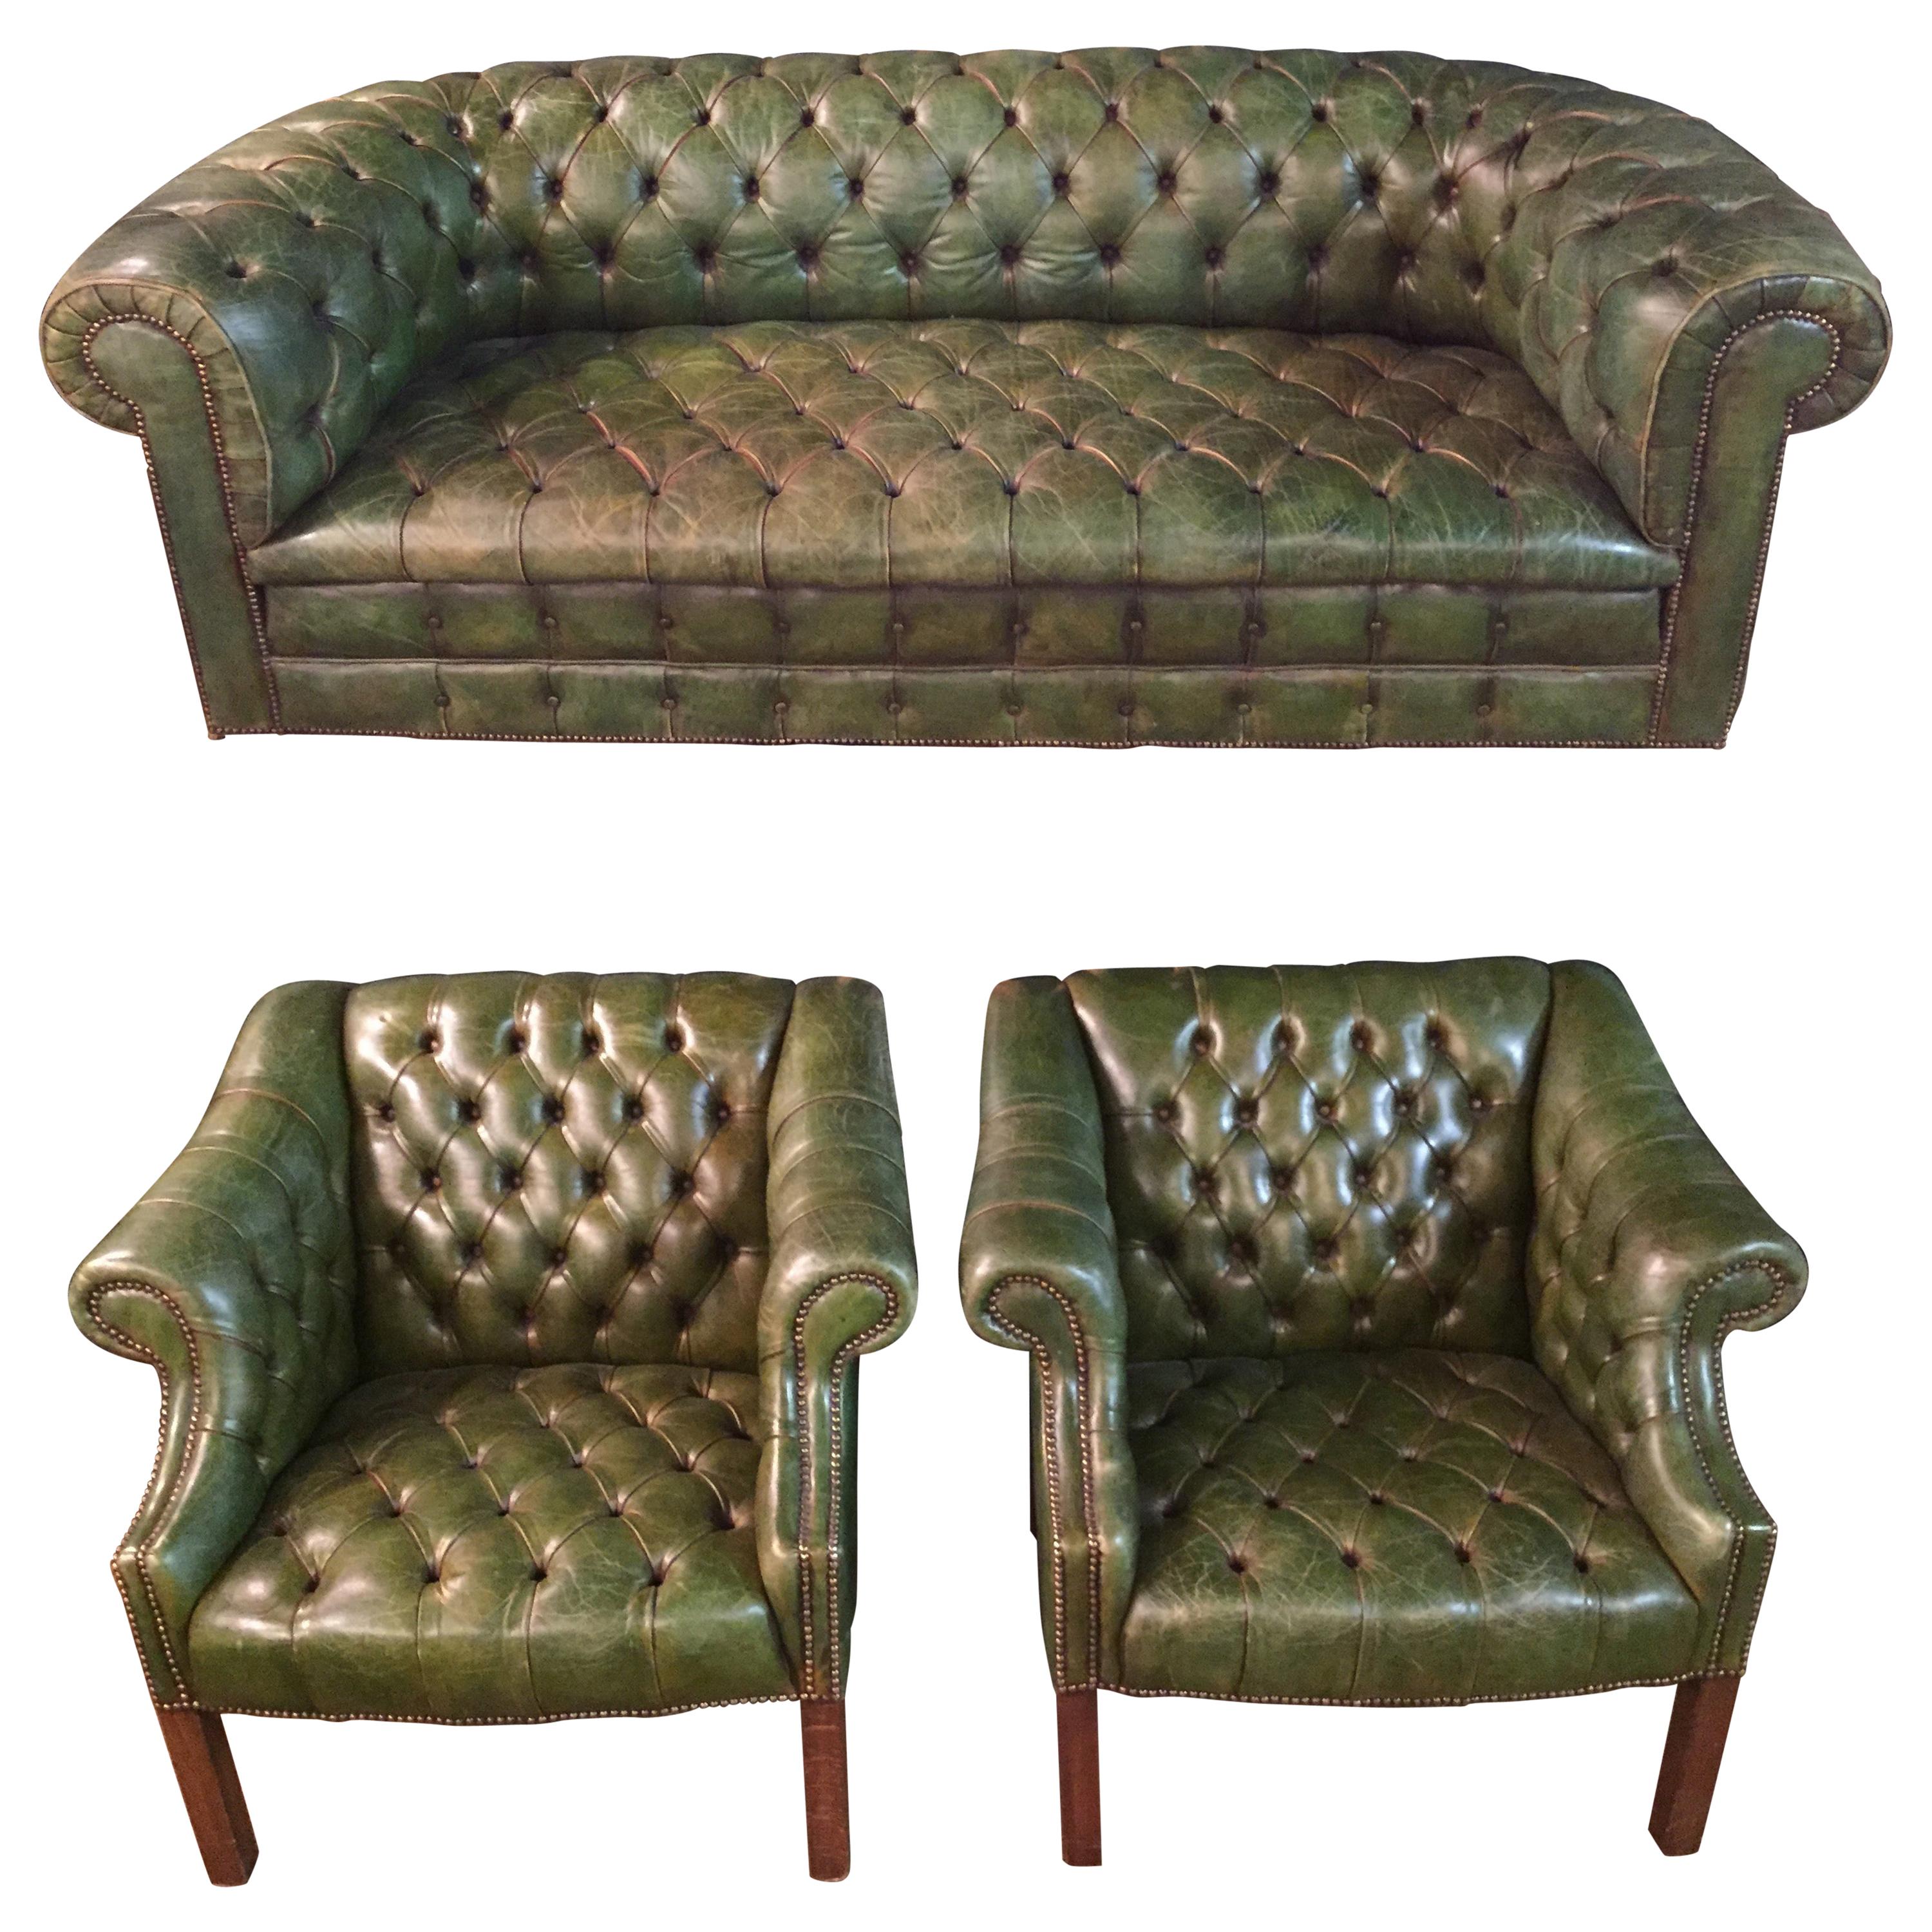 Original Chesterfield Set Big Sofa and 2 Armchairs in Faded Green from 1978